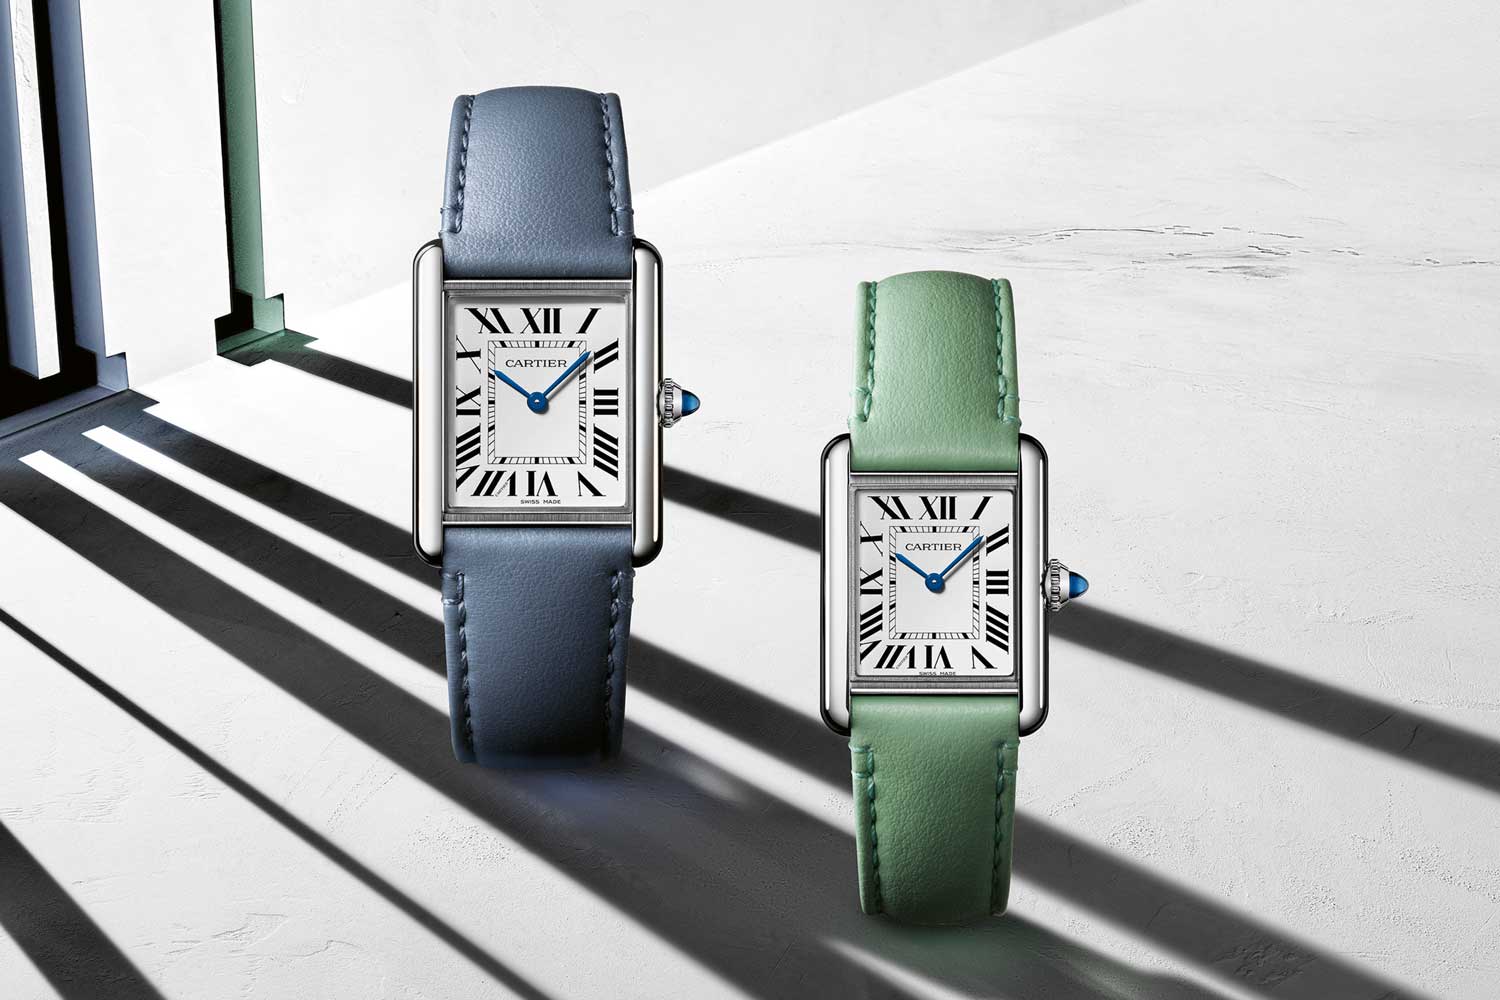 Equipped with SolarBeat technology on non-animal leather straps, these models demonstrate how Cartier innovates with the Tank